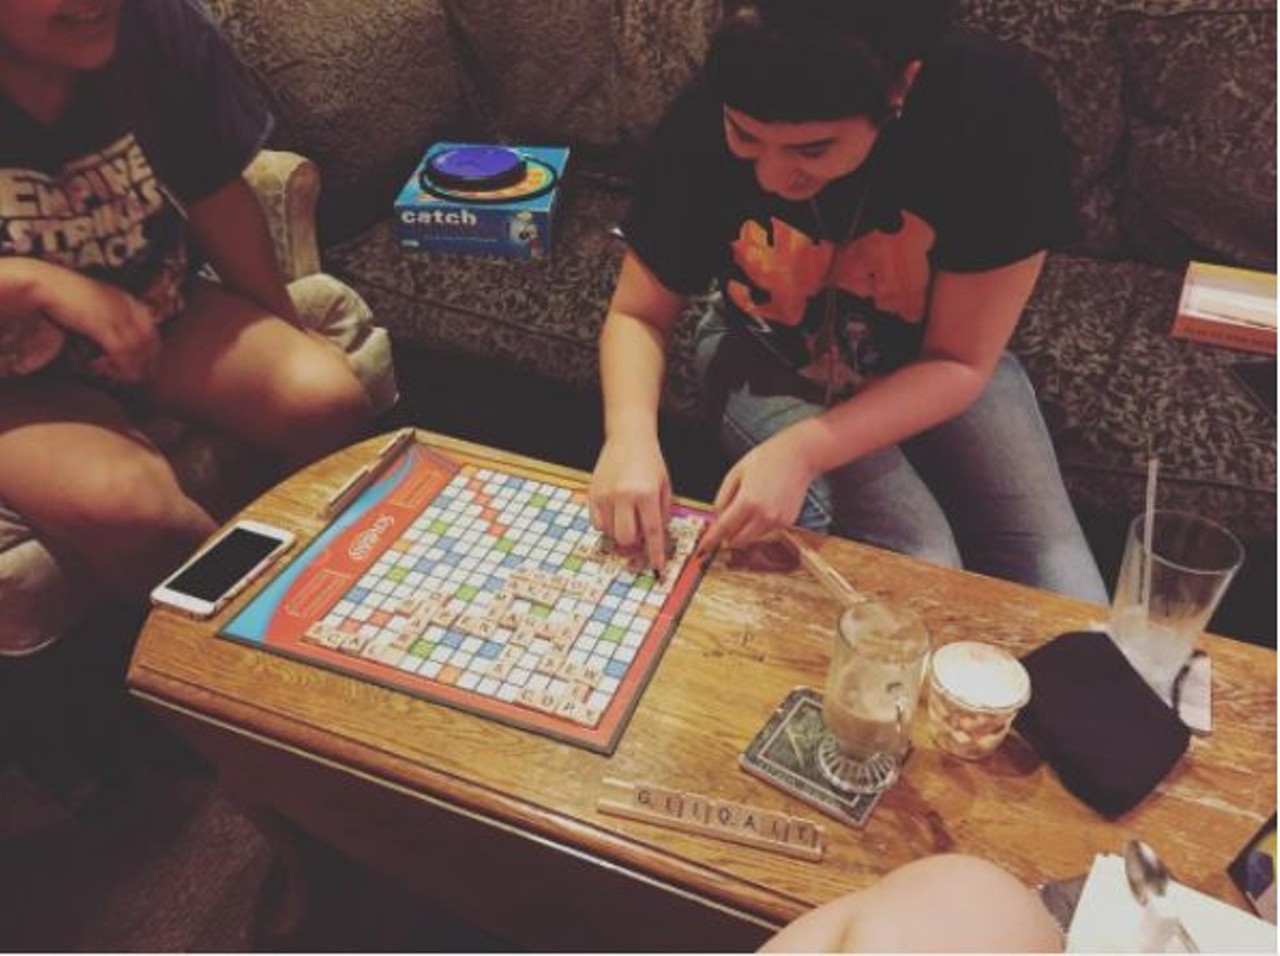 Play some board games at Candlelight Coffeehouse
3011 N St Mary's St, (210) 738-0099, candlelightsa.com
A little competition can be flirty in this cozy coffeehouse.
Photo via Instagram, babydeniro